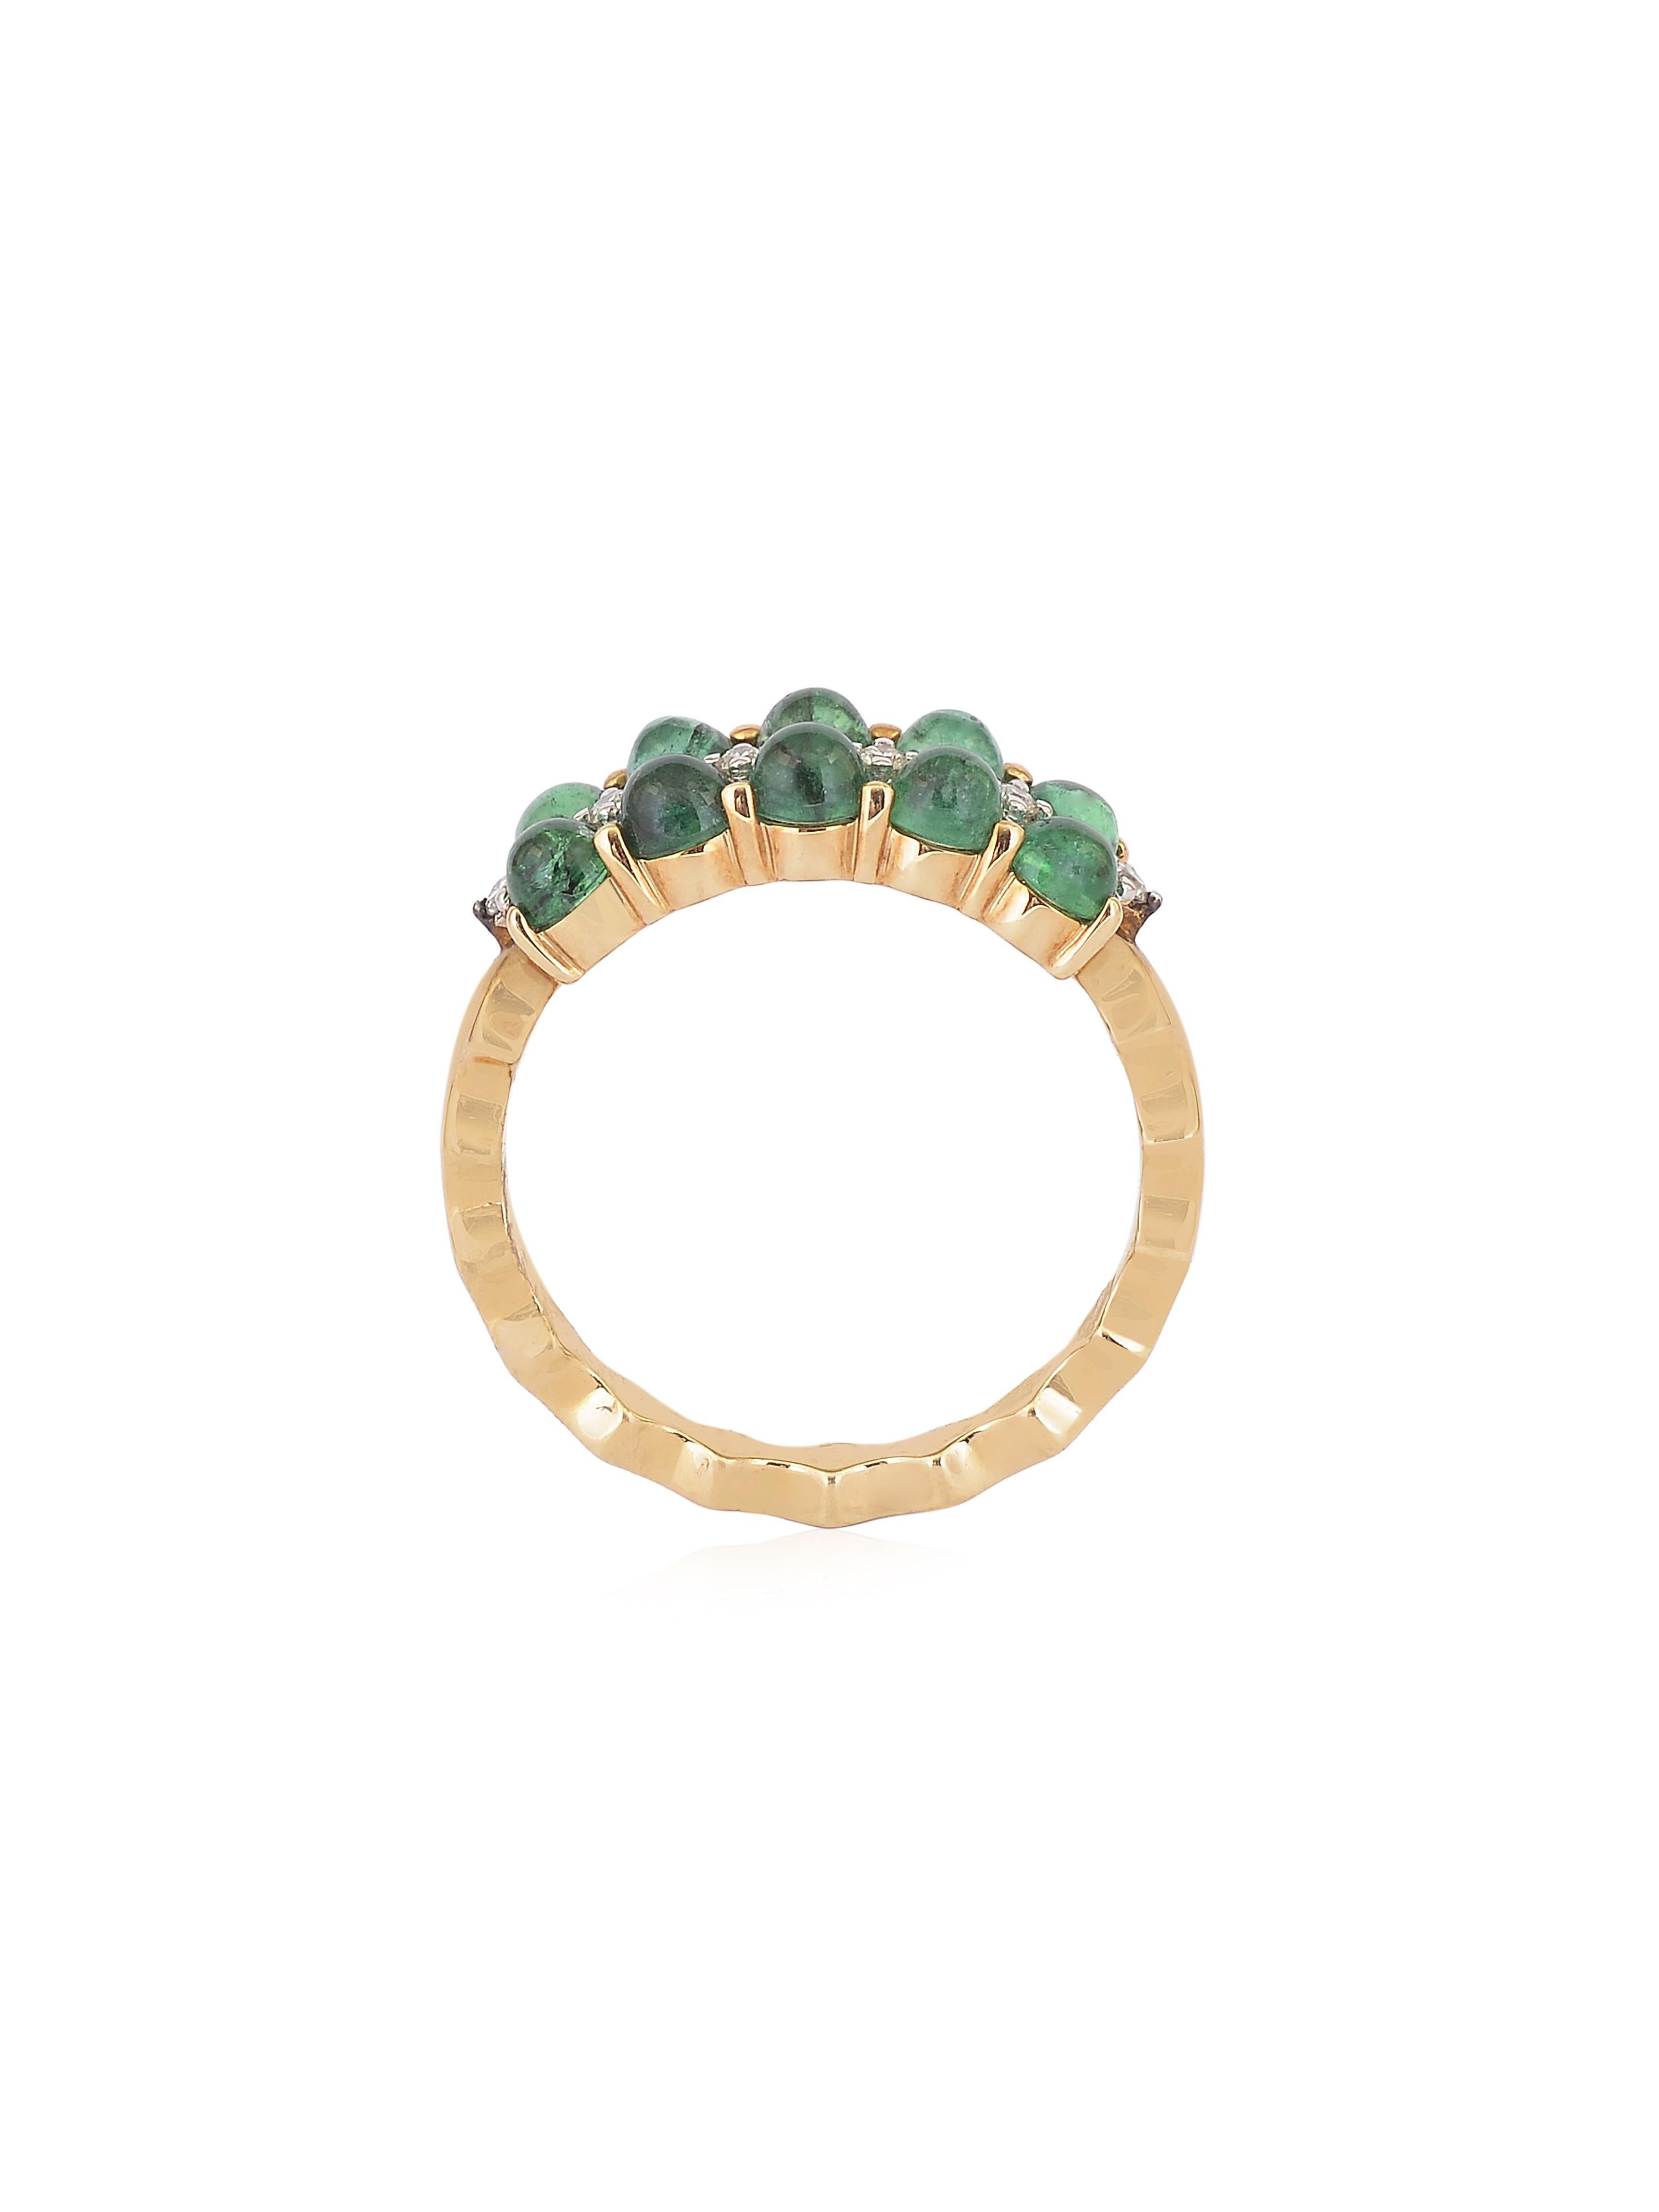 Emerald round Cabochon and diamond ring in 14K Gold  For Sale 1